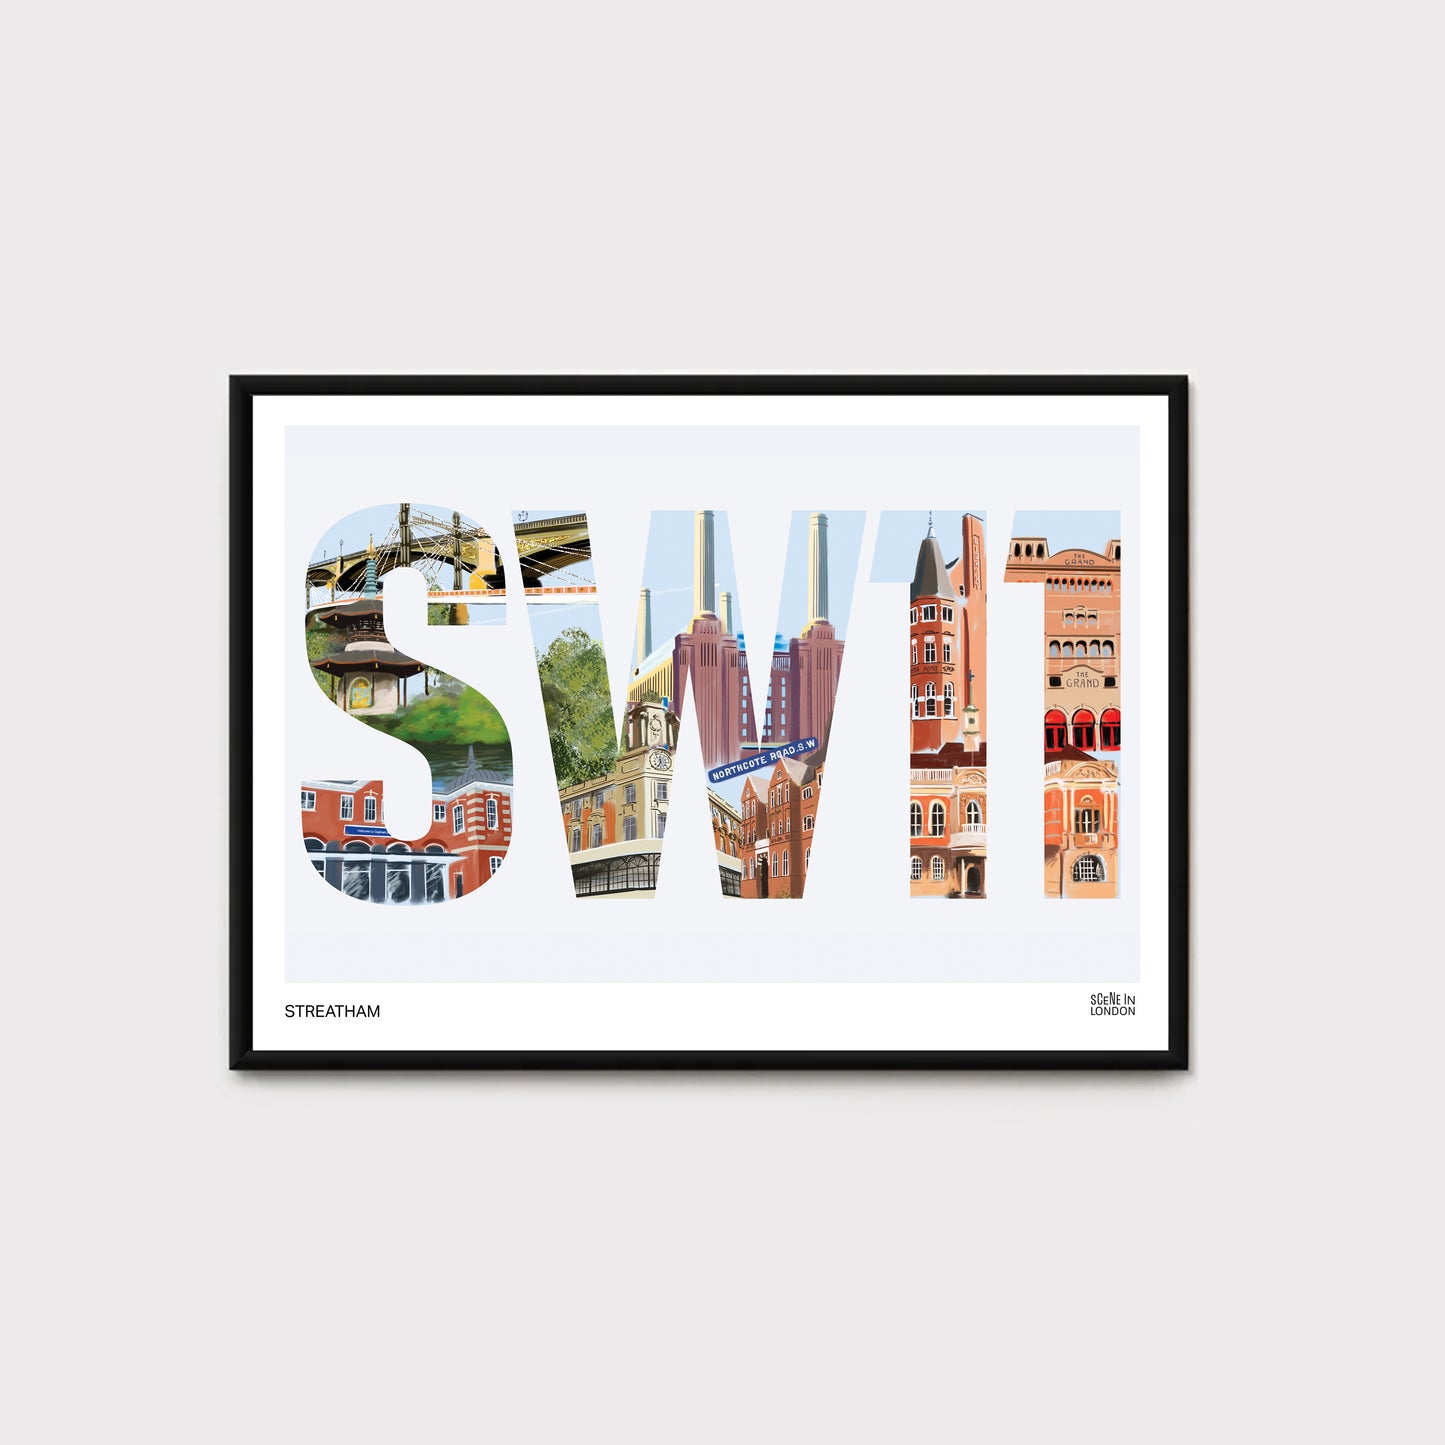 Art print featuring landmarks in SW11, Battersea and Clapham in London